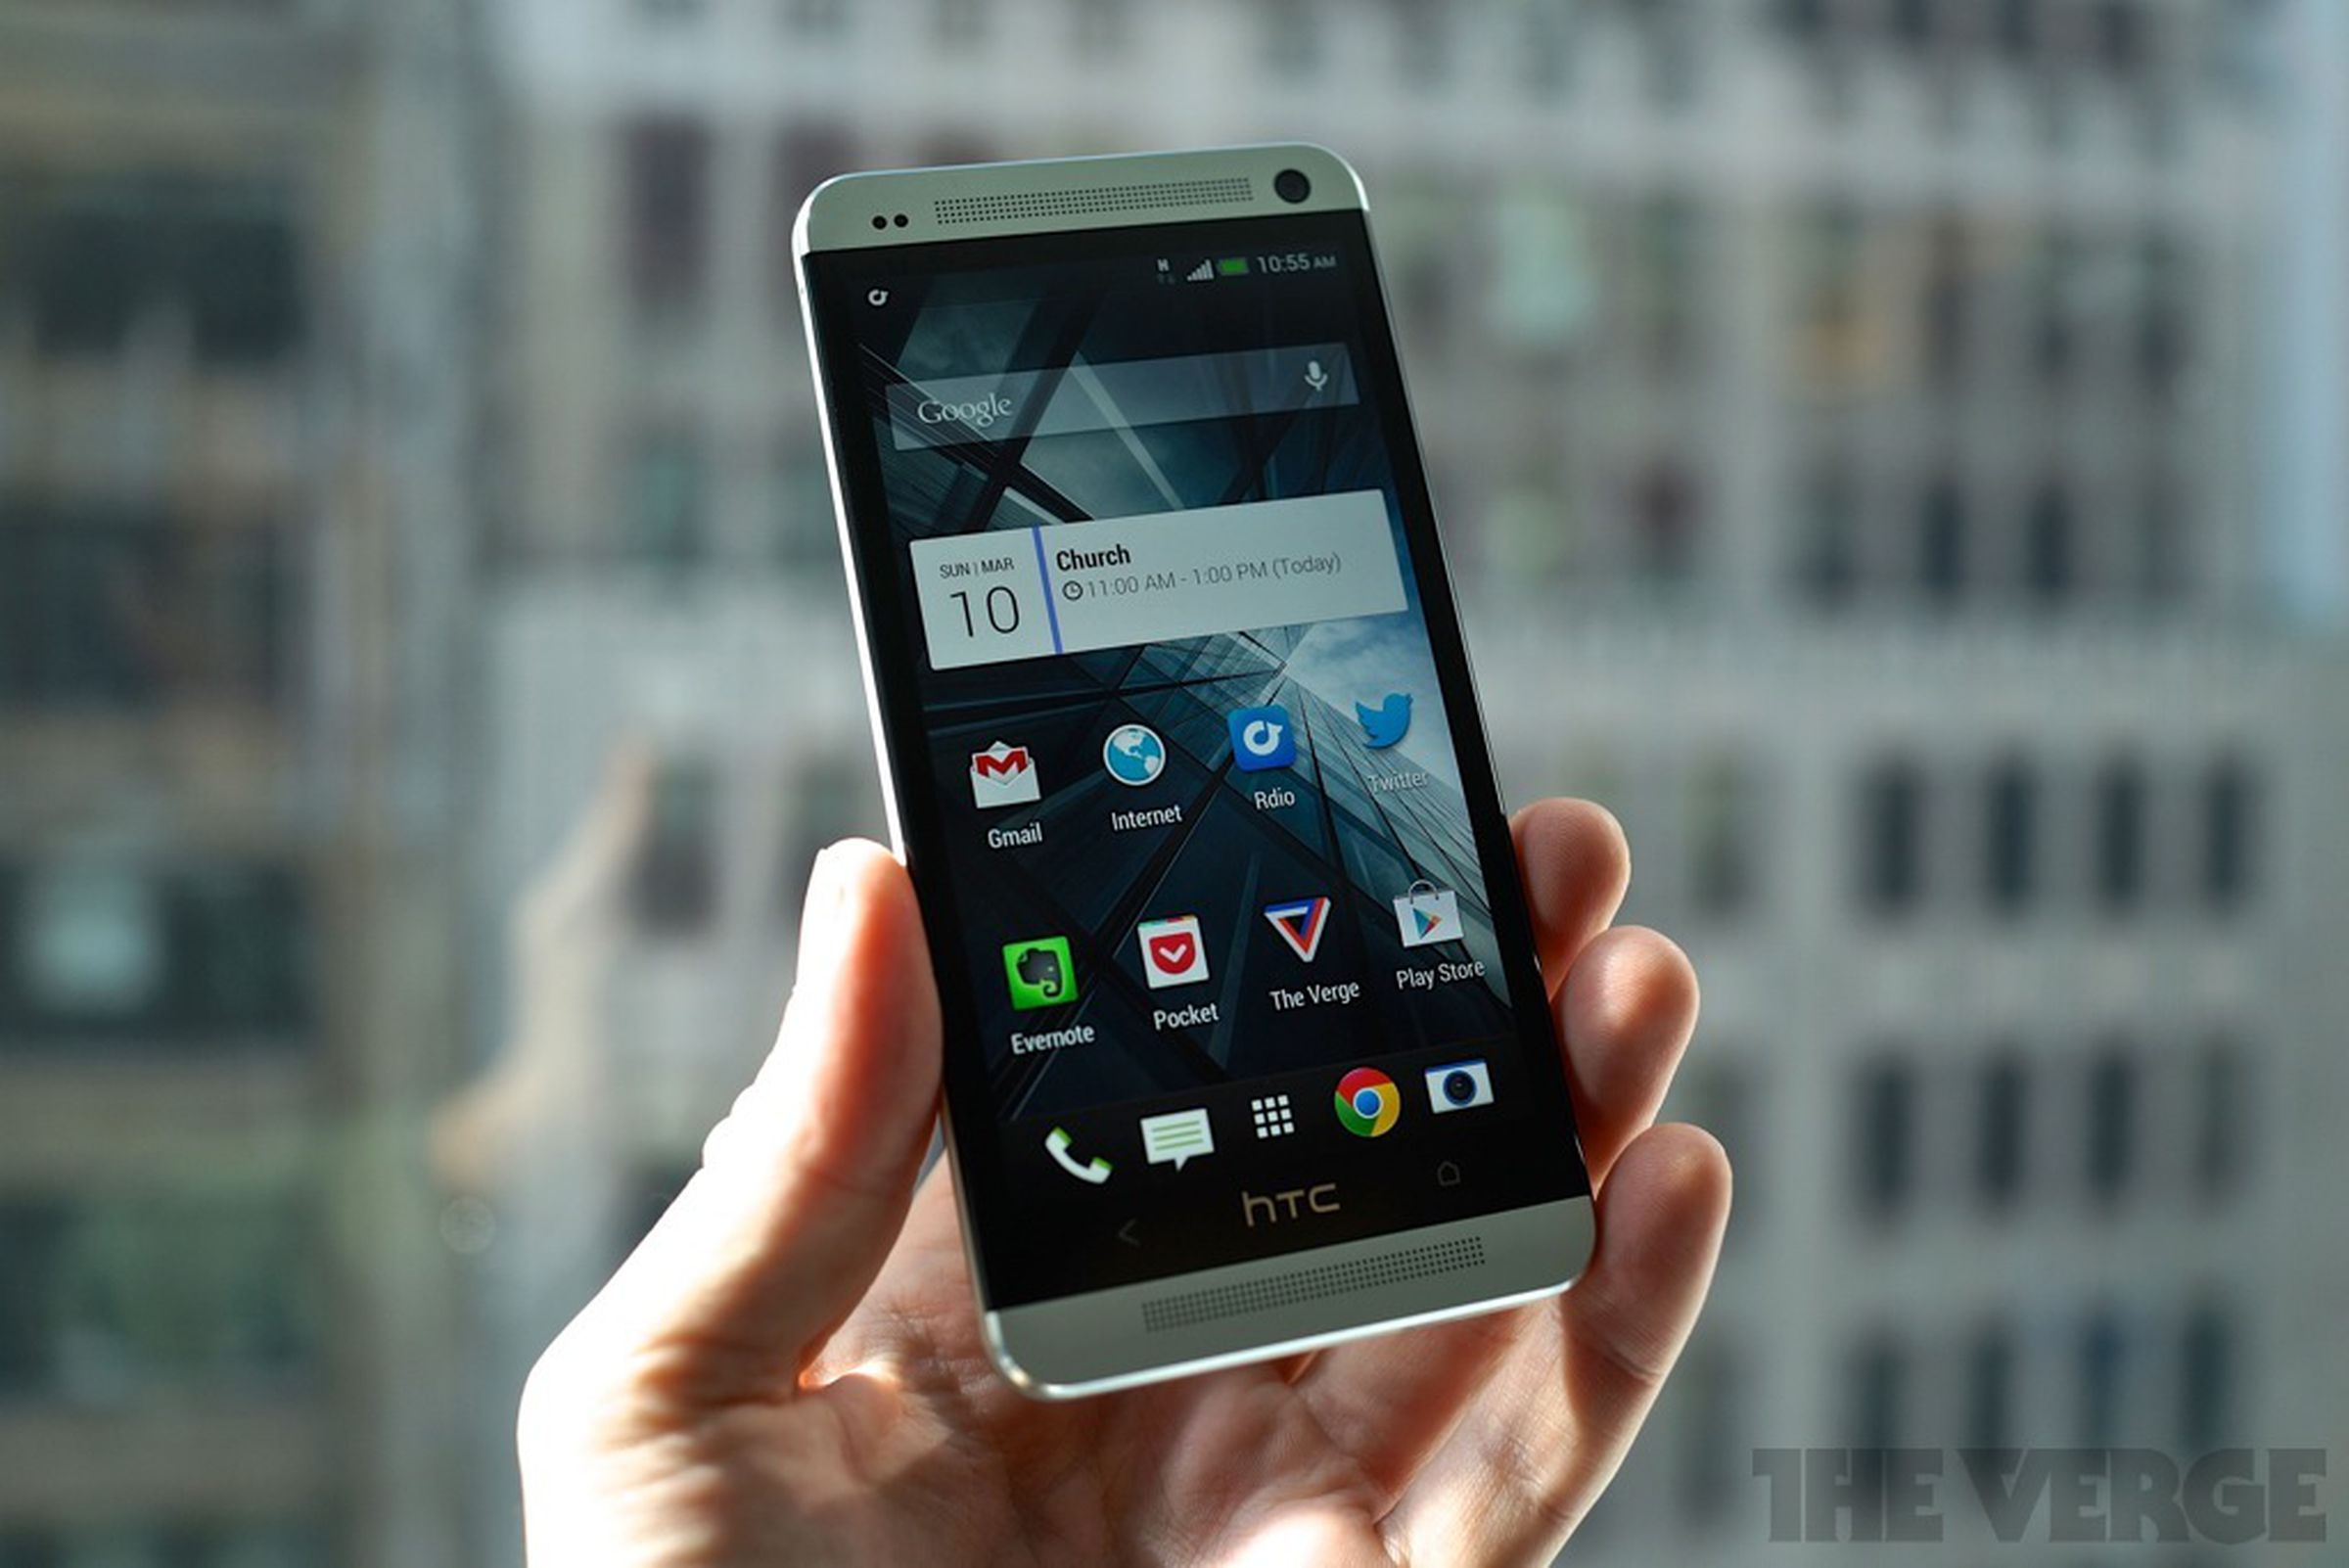 HTC One hands-on pictures